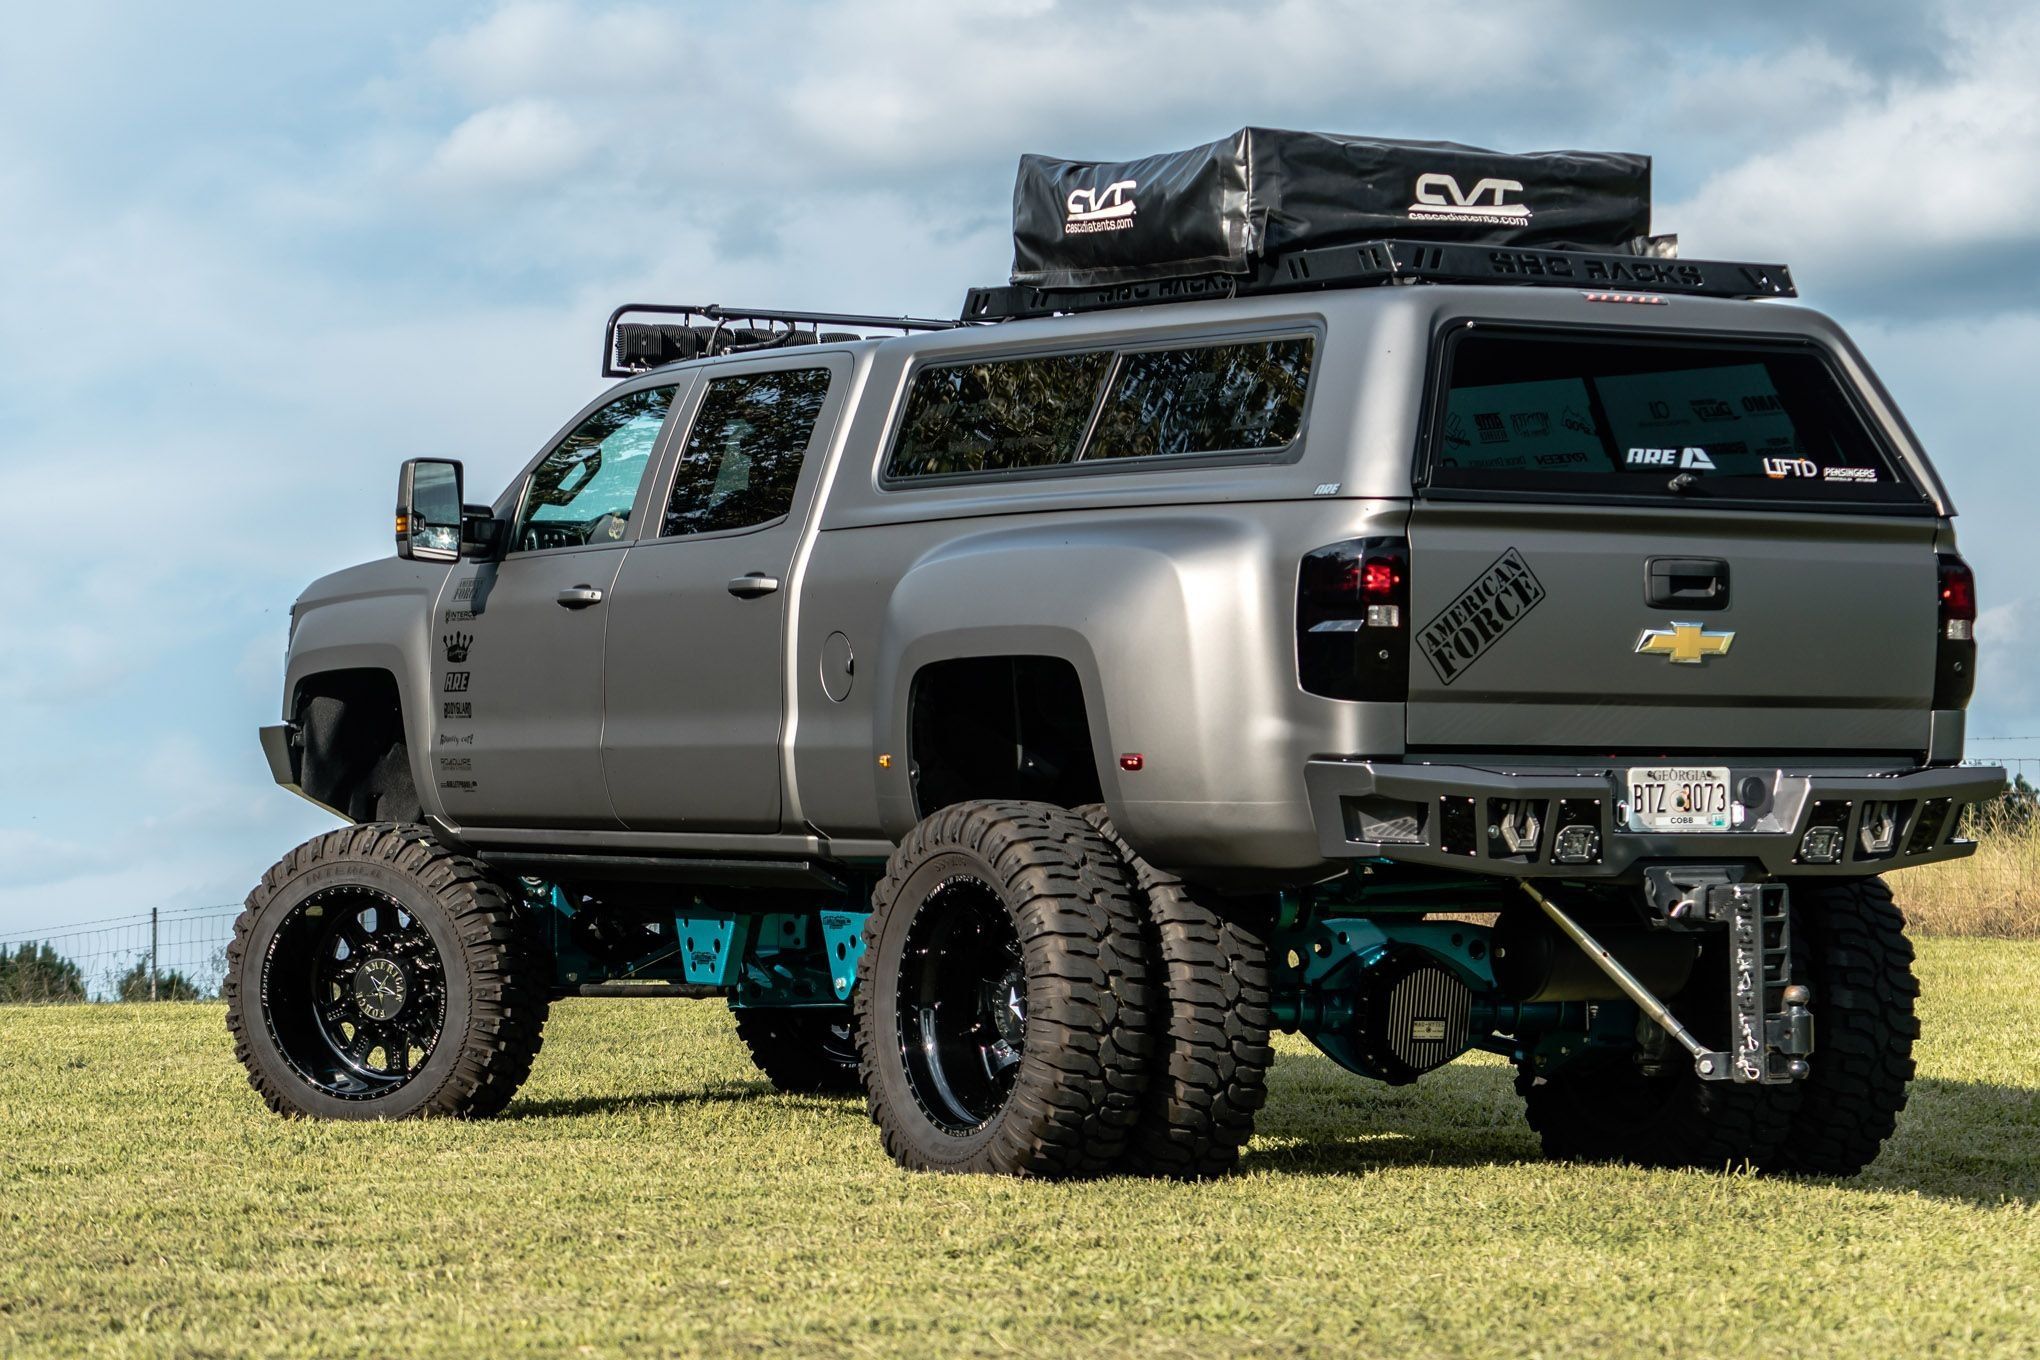 lamtac explore inside the dinosaur chevrolet off road with the giant s power of more than horsepower 650976c9a6165 Explore Insιde The "dinosaur" CҺevroleT Off Road With The Giant's Power Of More Than 759 Horsepower